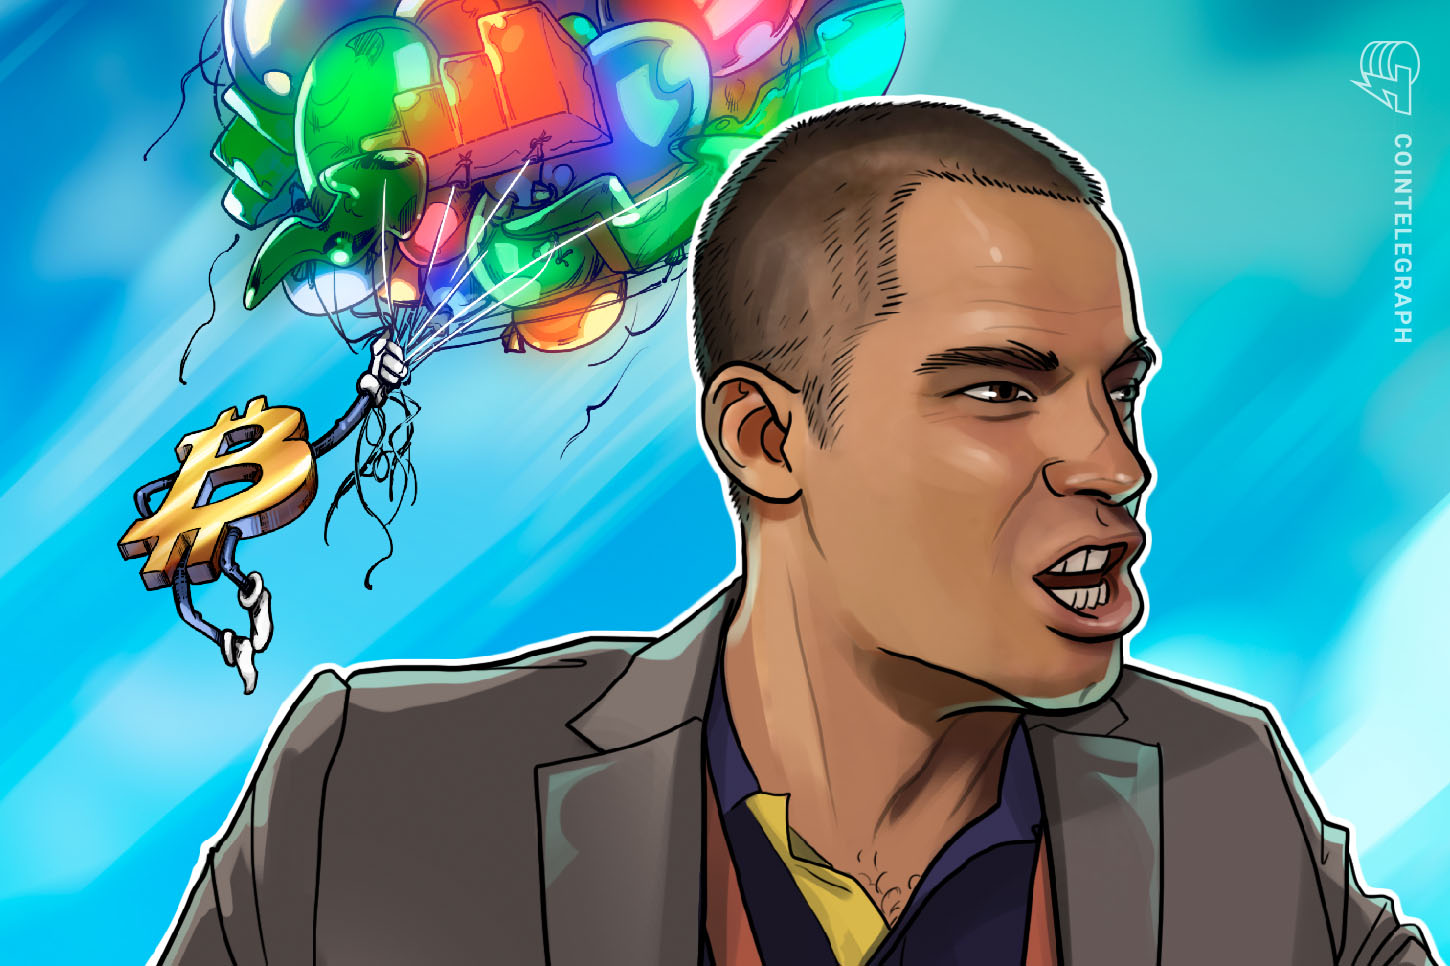 Roger Ver Claims His Bitcoin Transaction Charges Totaled $1,000 at Instances